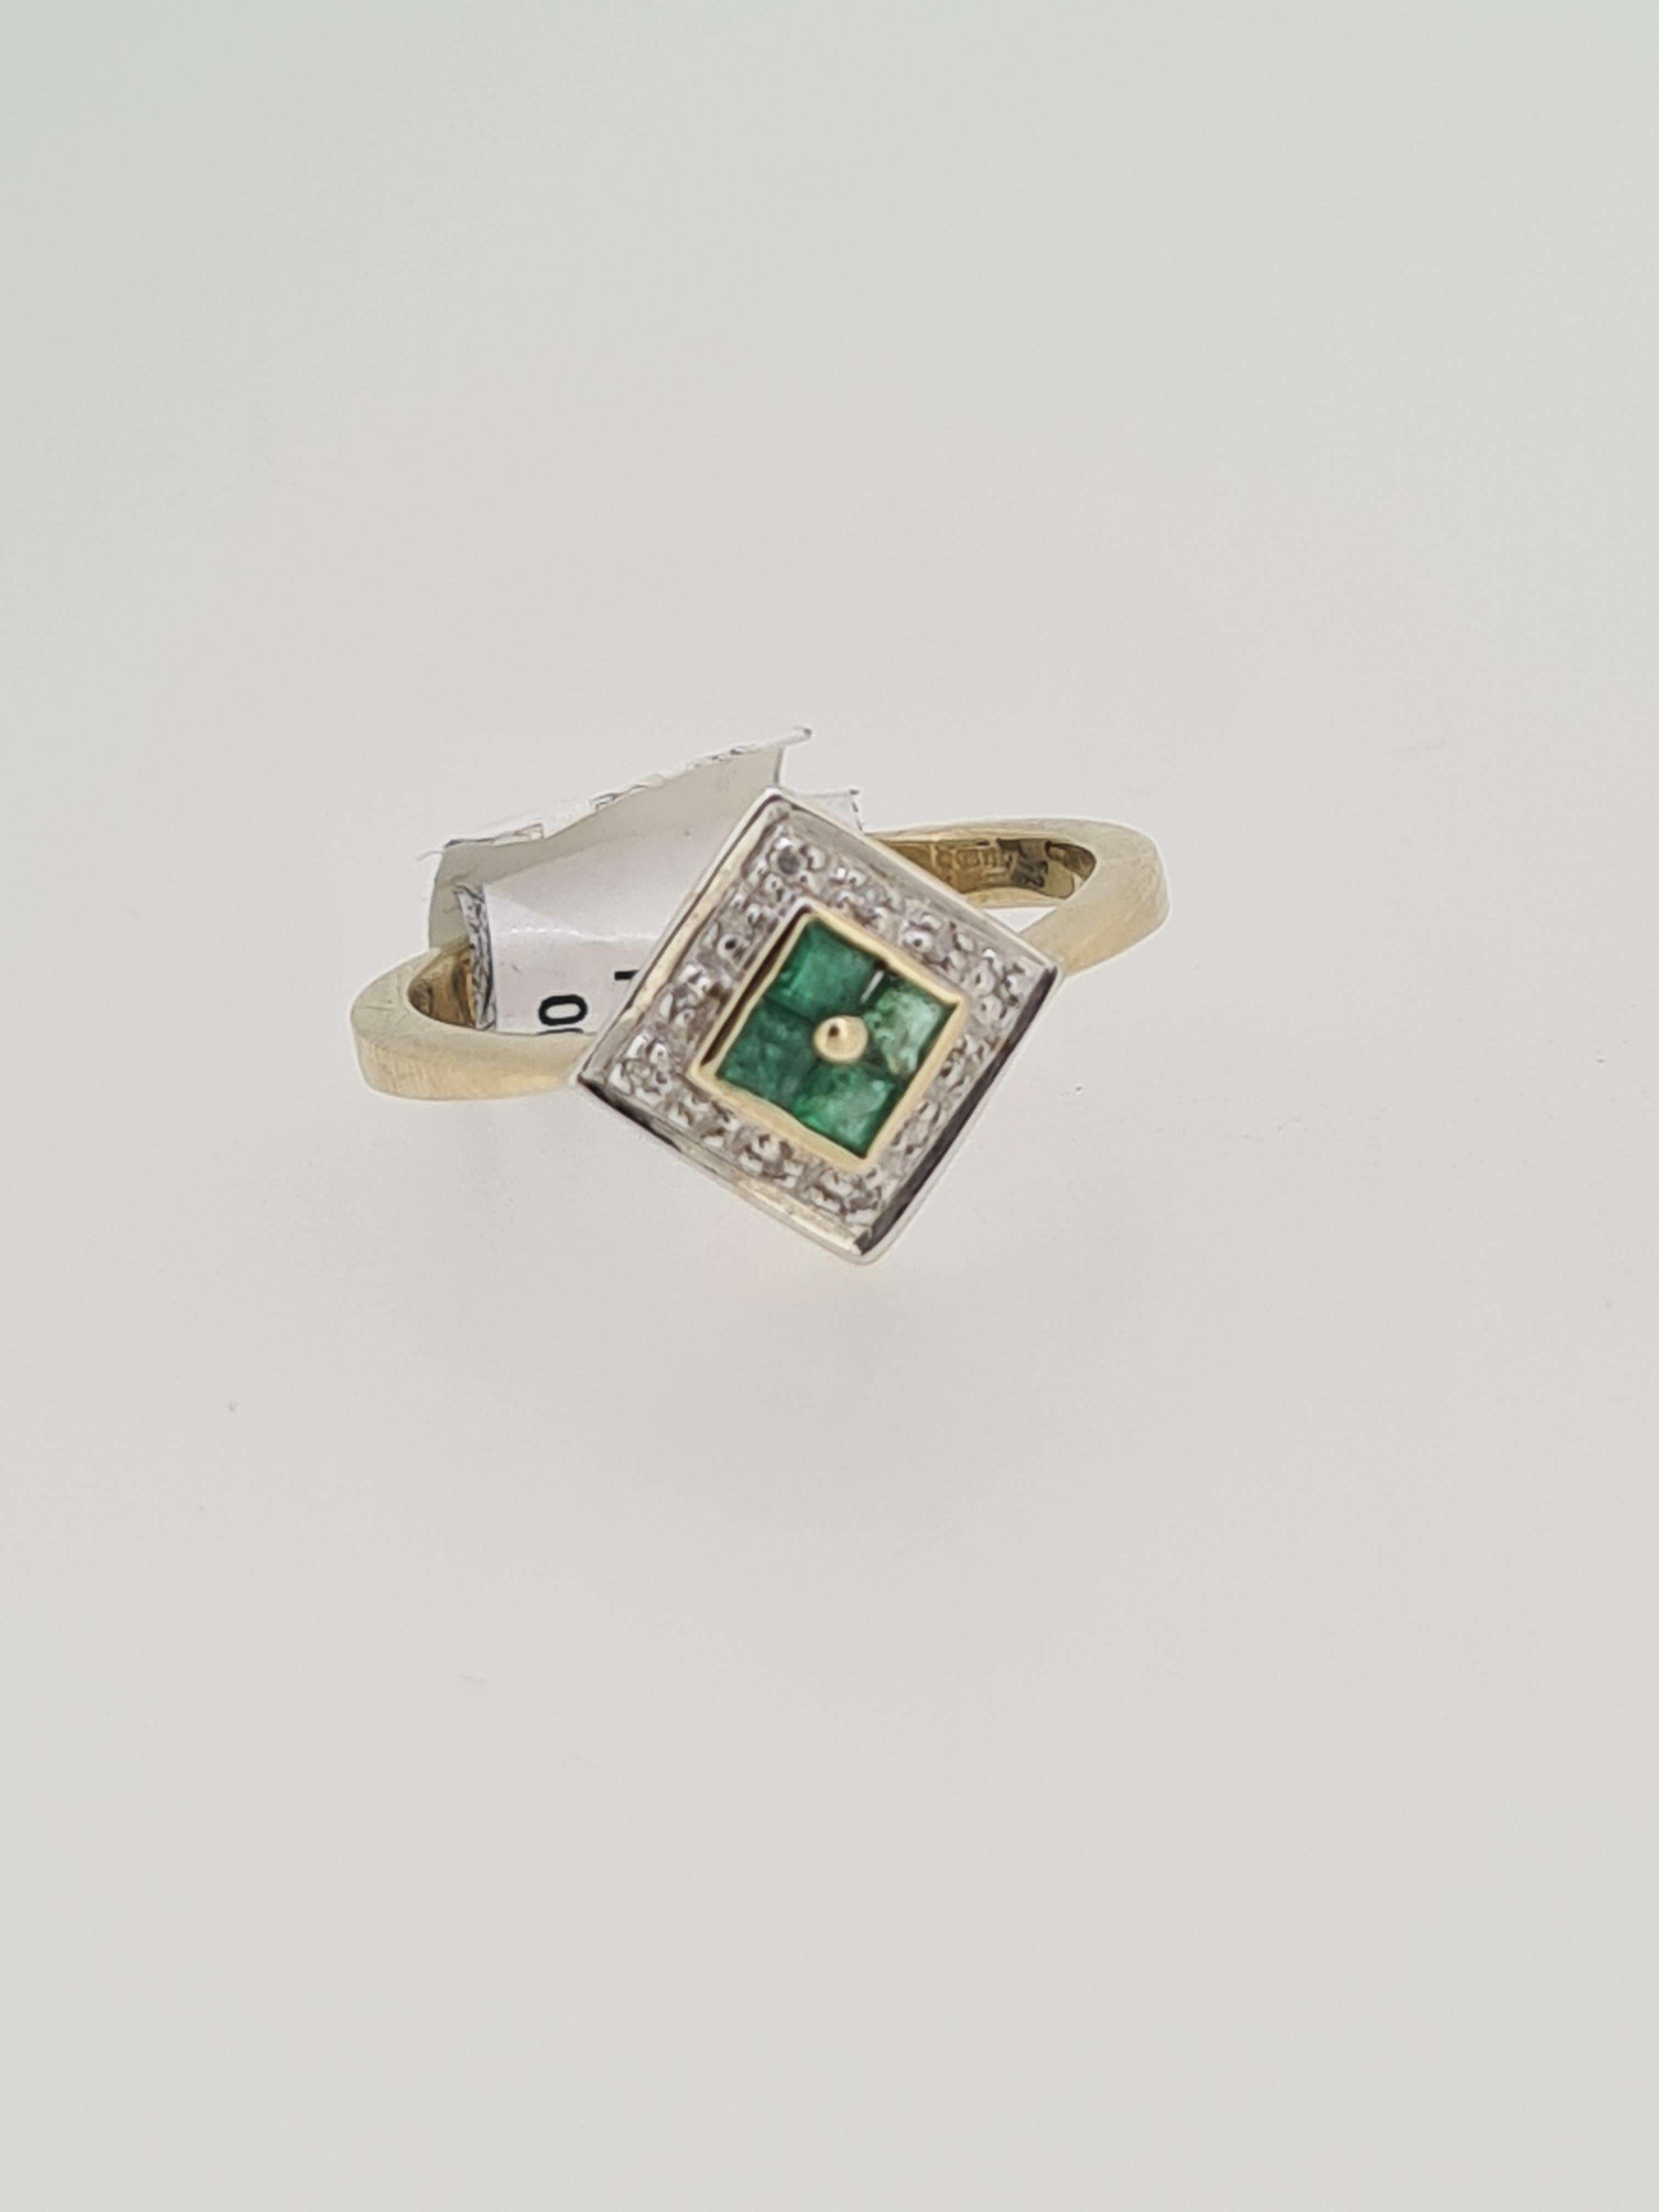 9ct gold emerald and diamond ring - Image 4 of 4